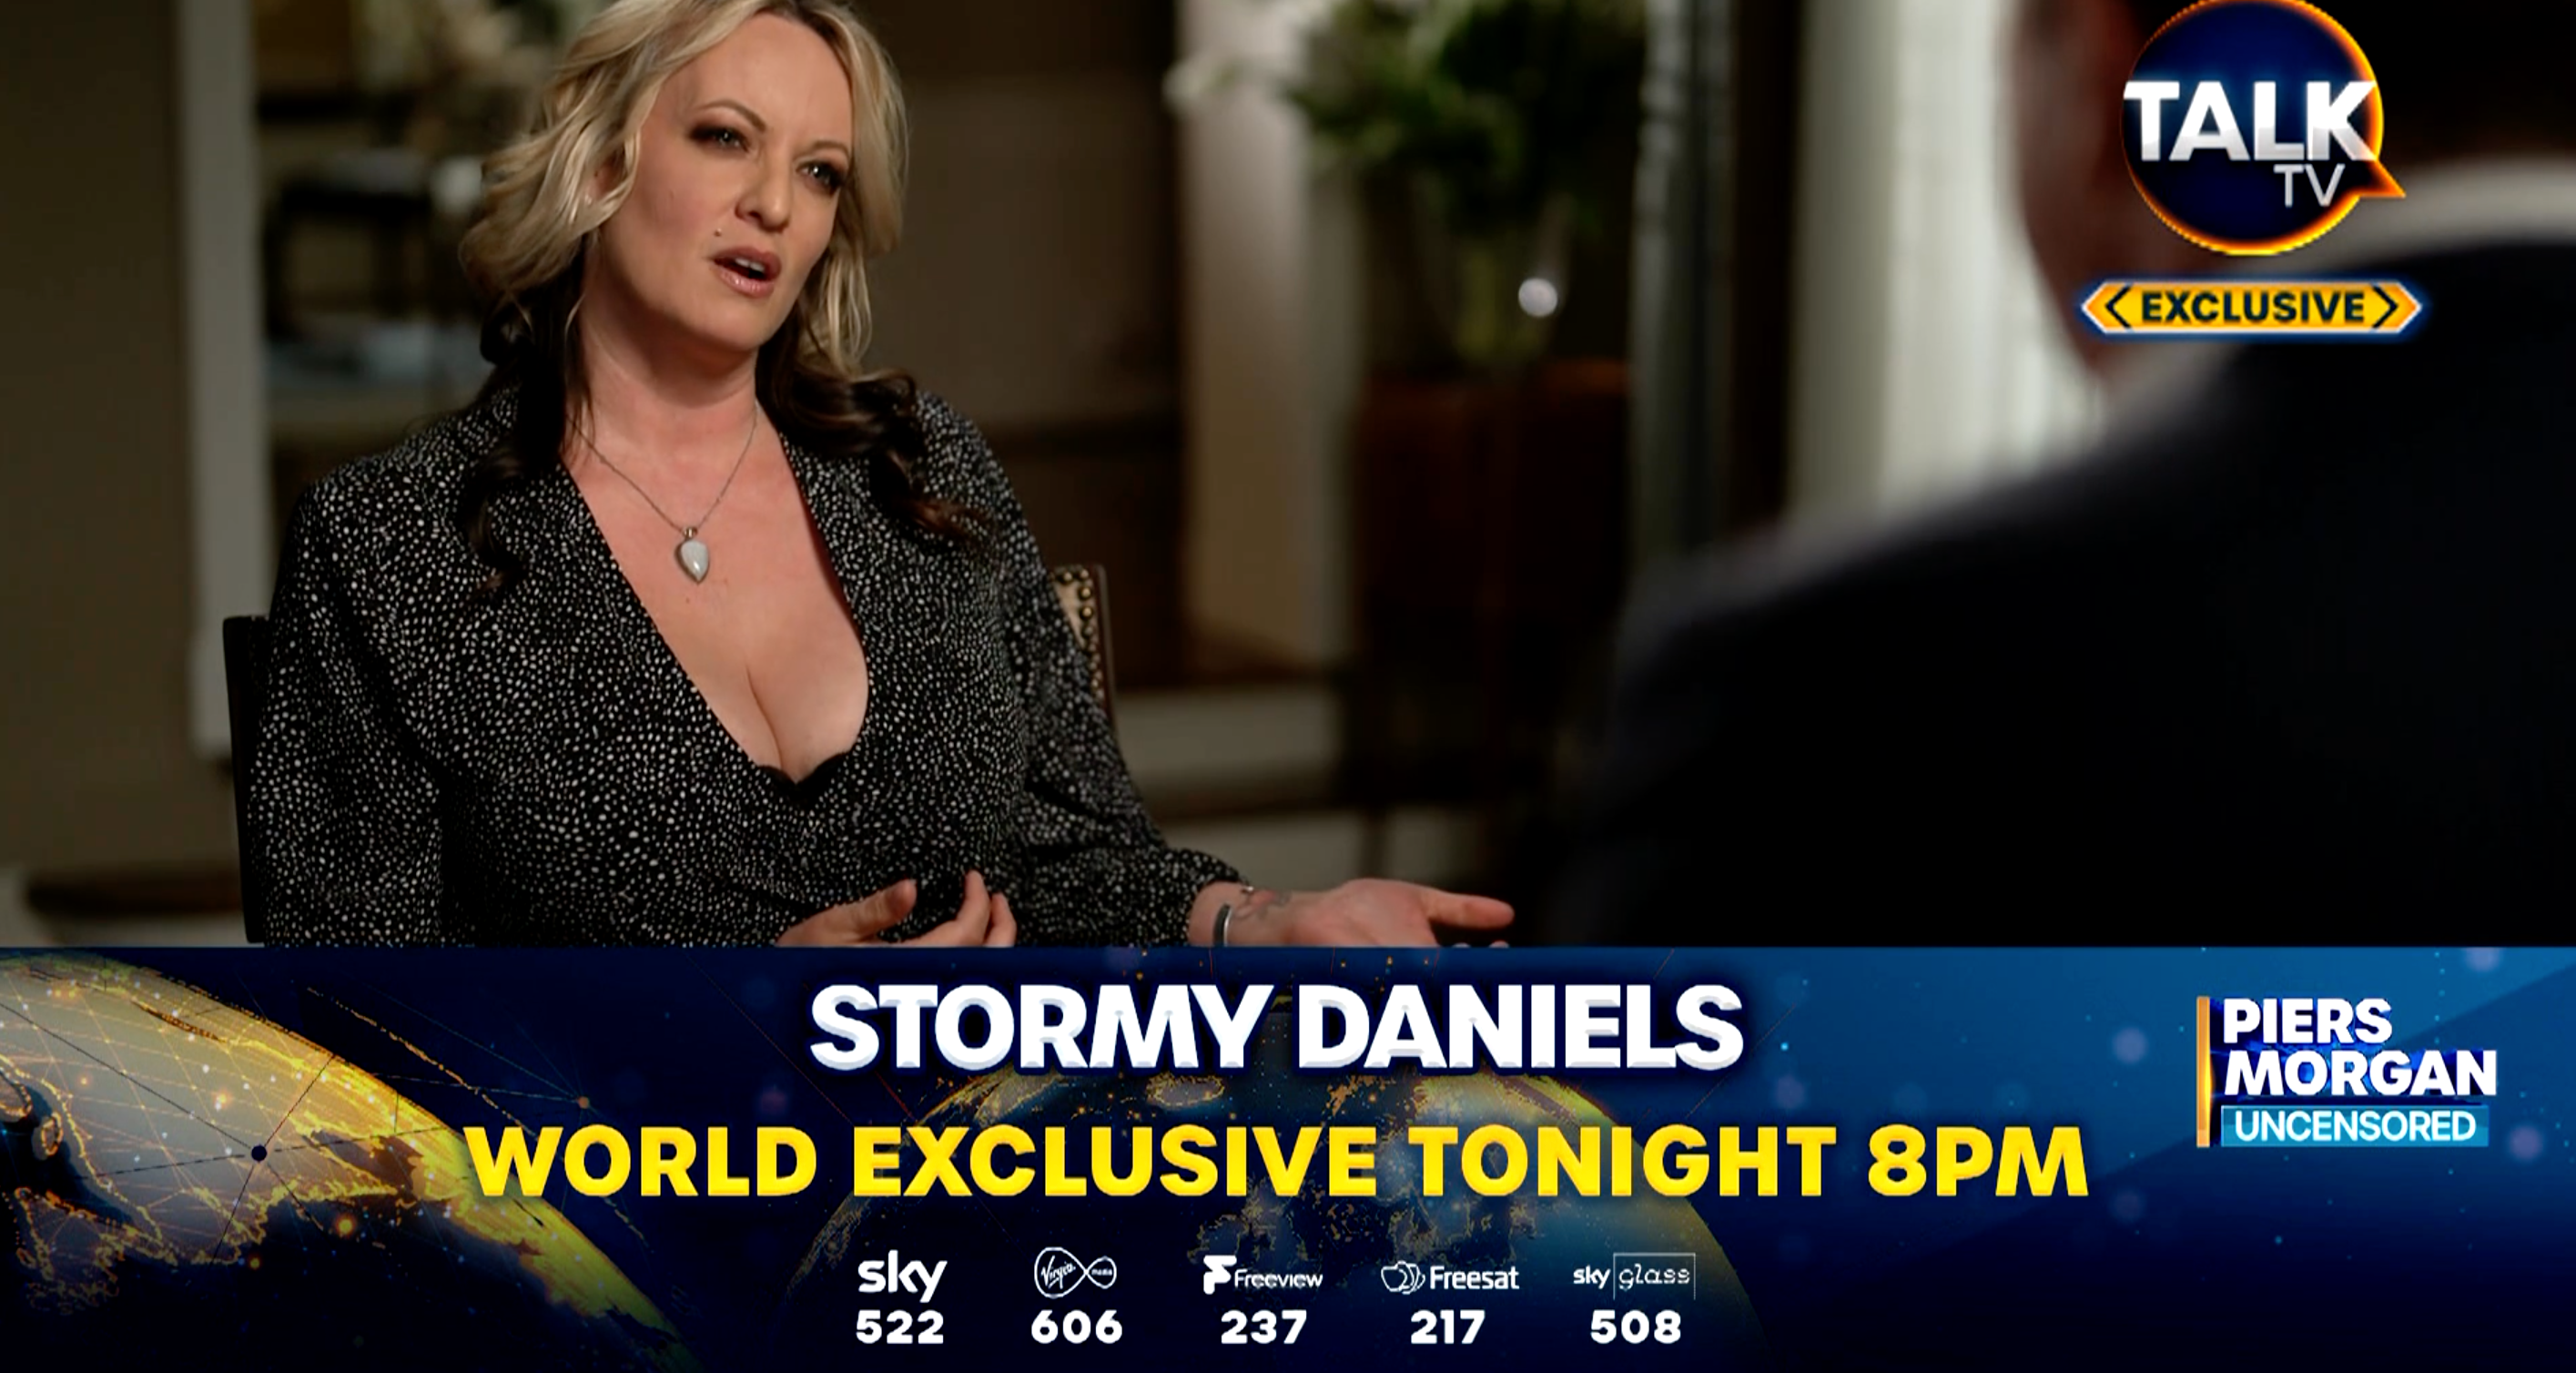 The one-on-one interview is Stormy Daniels’ first since Donald Trump appeared in court